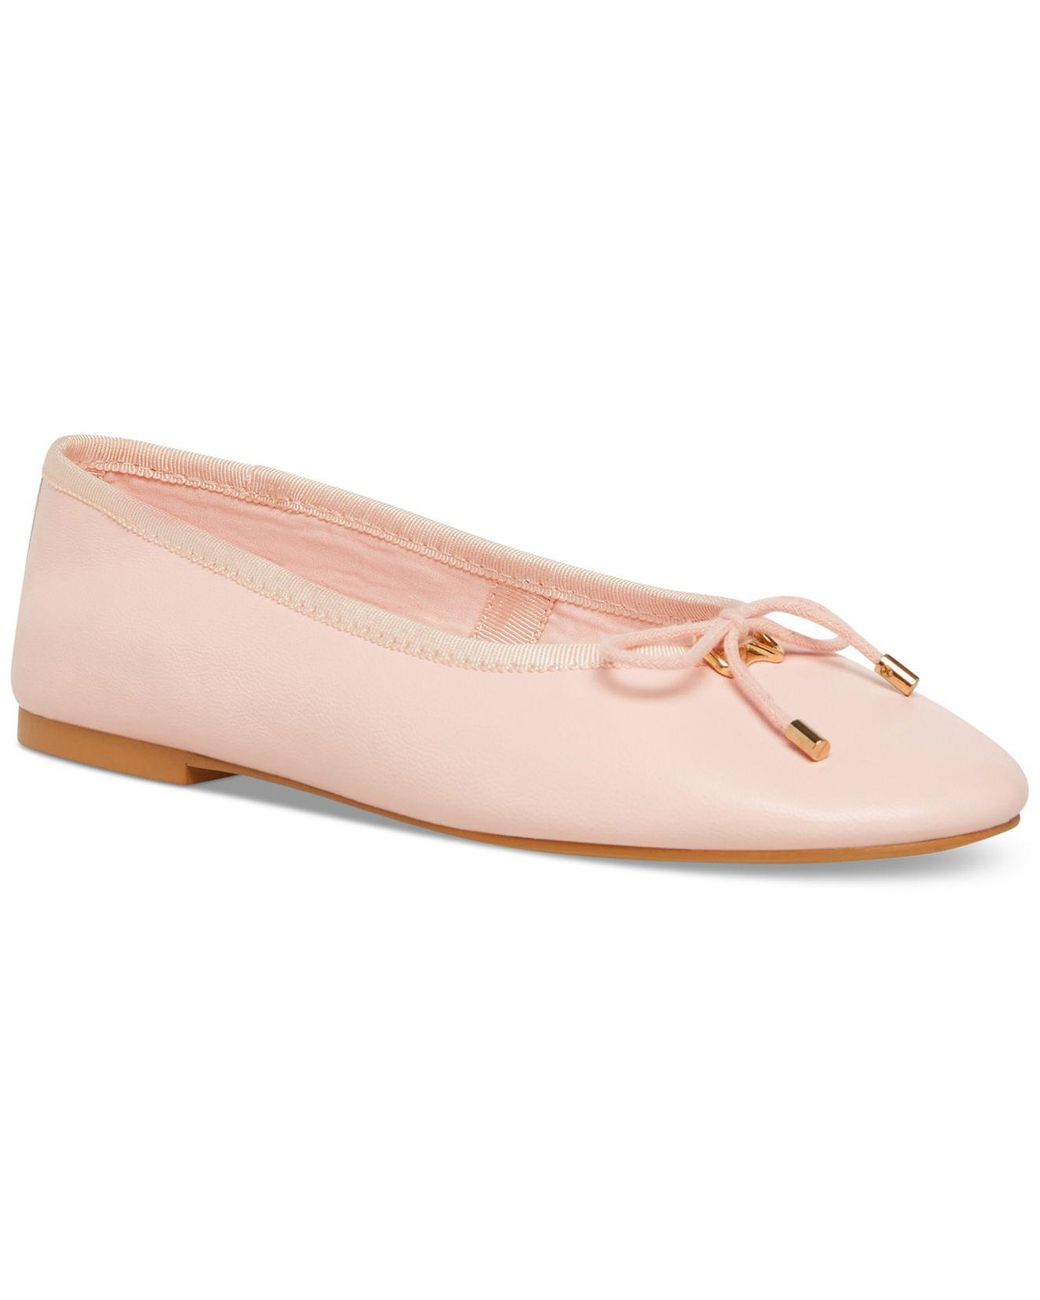 Steve Madden Blossoms Slip-on Bow Ballet Flats in Pink | Lyst Canada